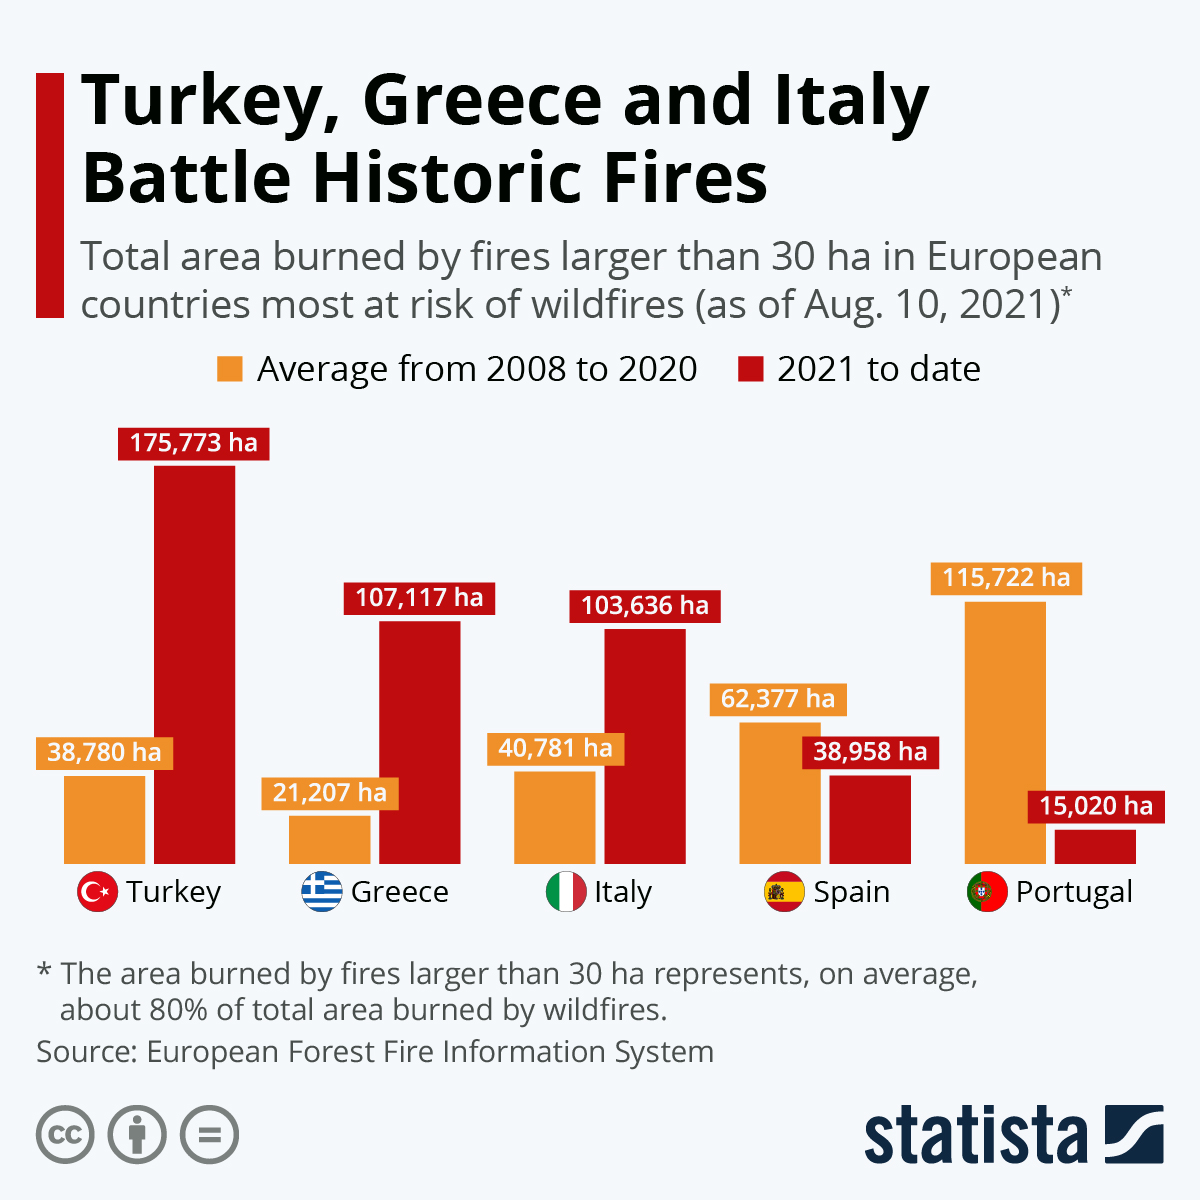 Turkey, Greece and Italy Battle Historic Fires